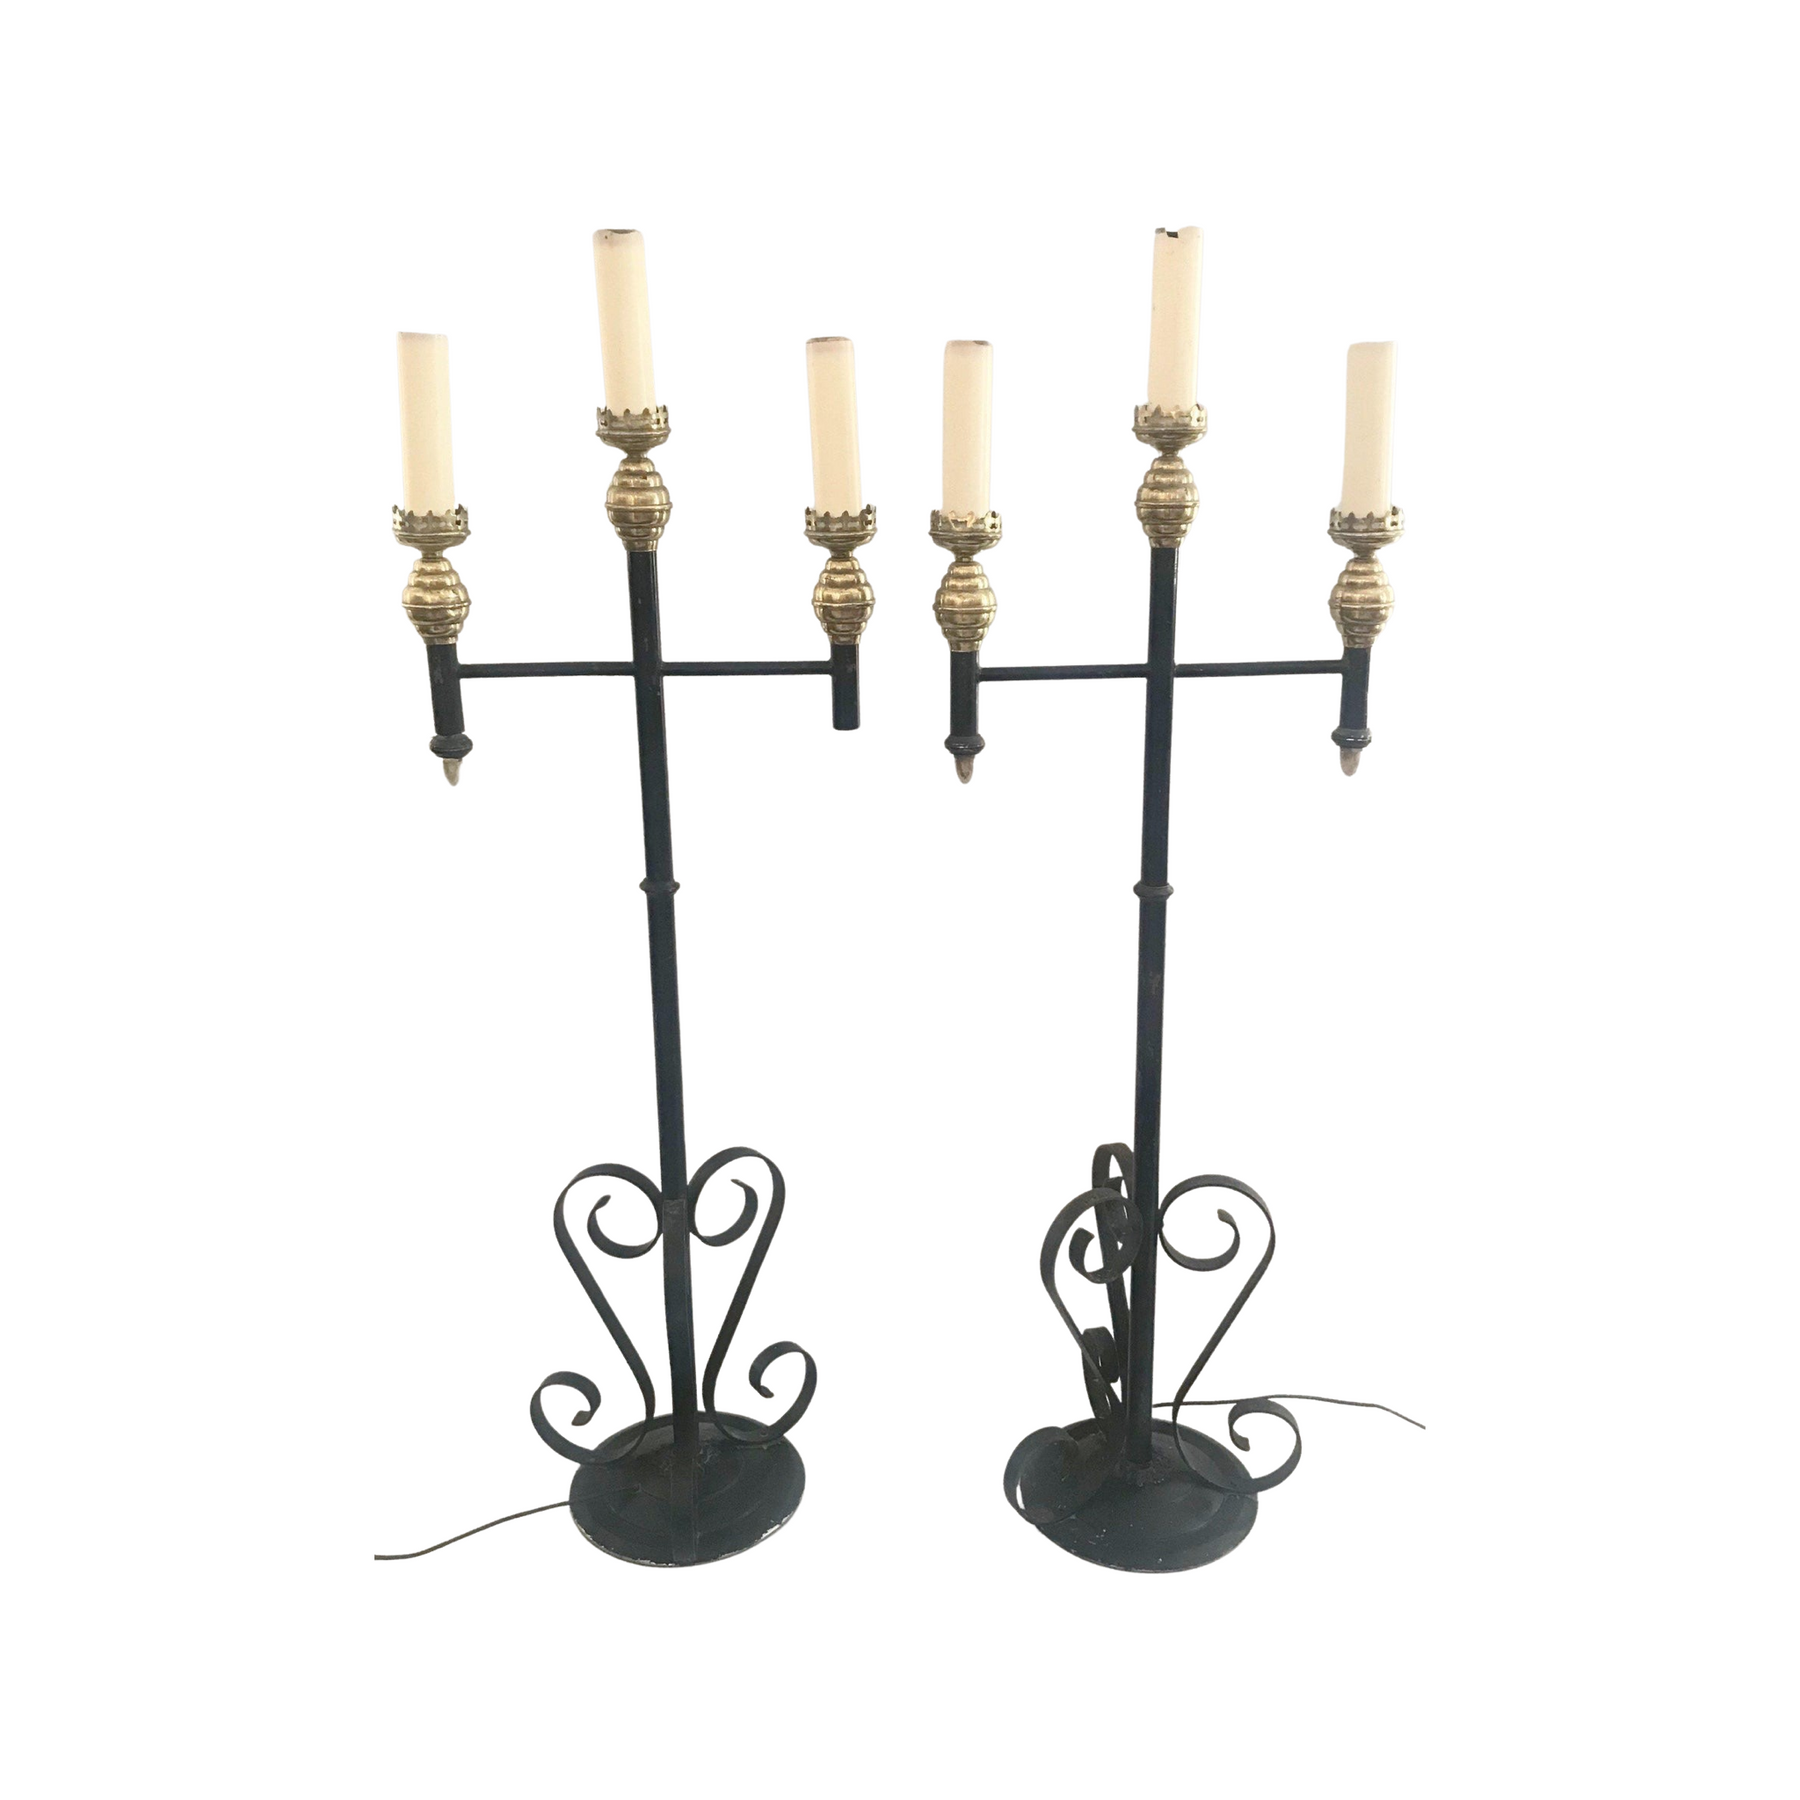 One Antique French HUGE Church Altar Candle Holder. Bronze and Brass Church  Candelabra. Giant Church Candle Holder. 